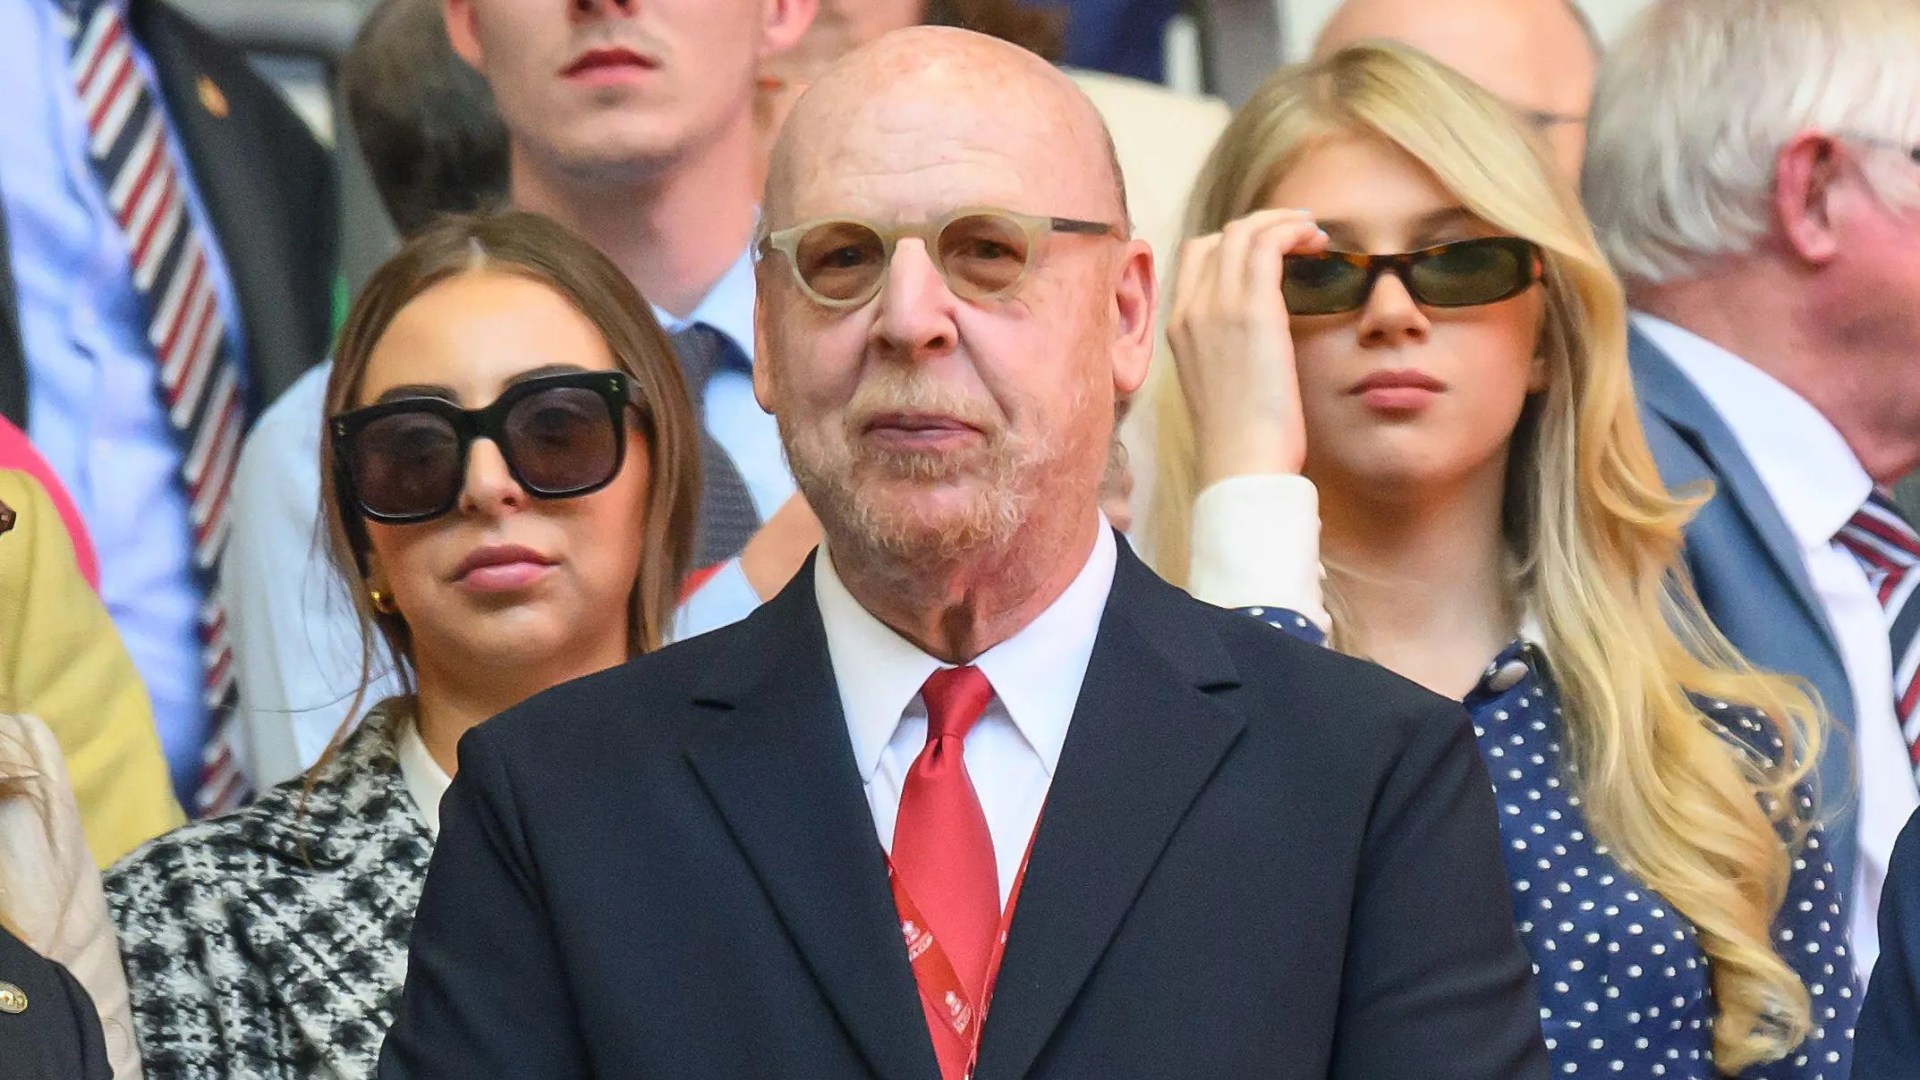 Man Utd owner Avram Glazer sparks concern in Manchester as he looks to expand stake in latest sporting venture [Video]